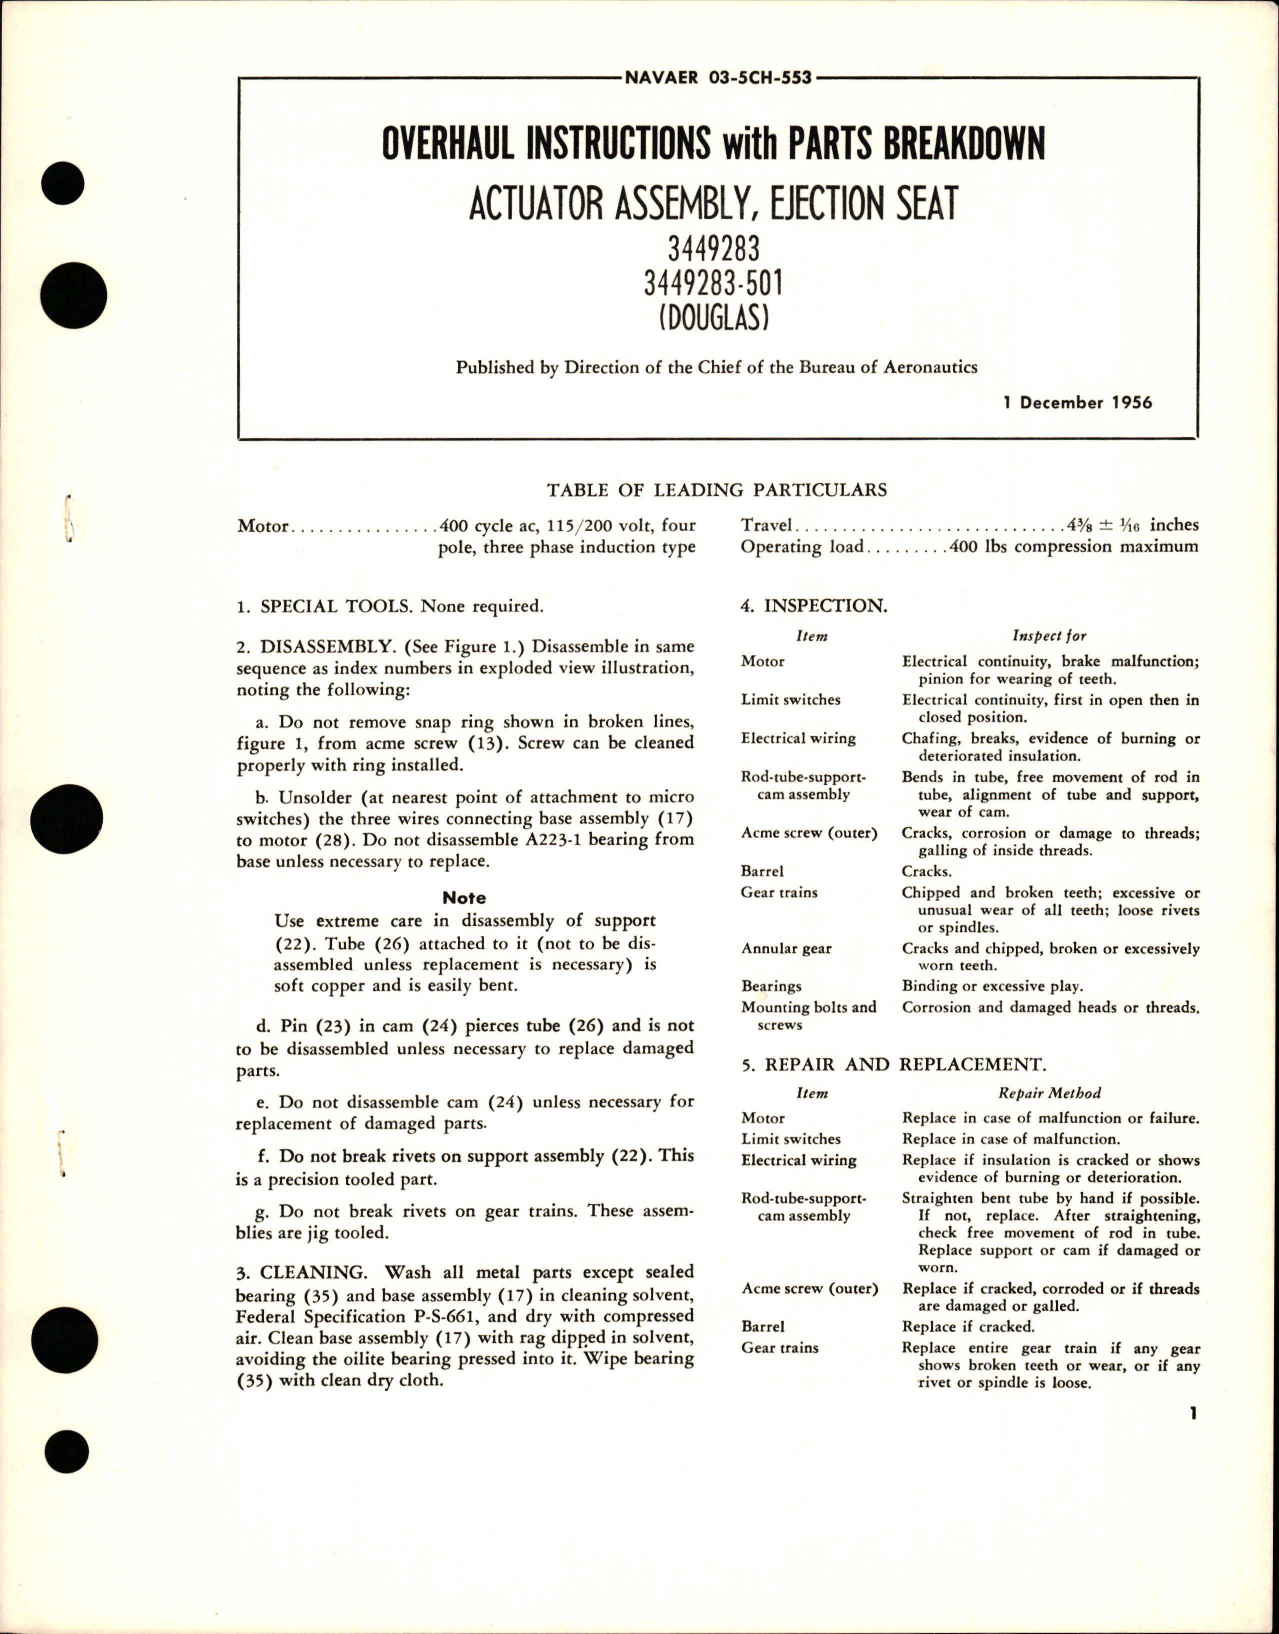 Sample page 1 from AirCorps Library document: Overhaul Instructions with Parts Breakdown for Ejection Seat Actuator Assembly - 3449283 and 3449283-501